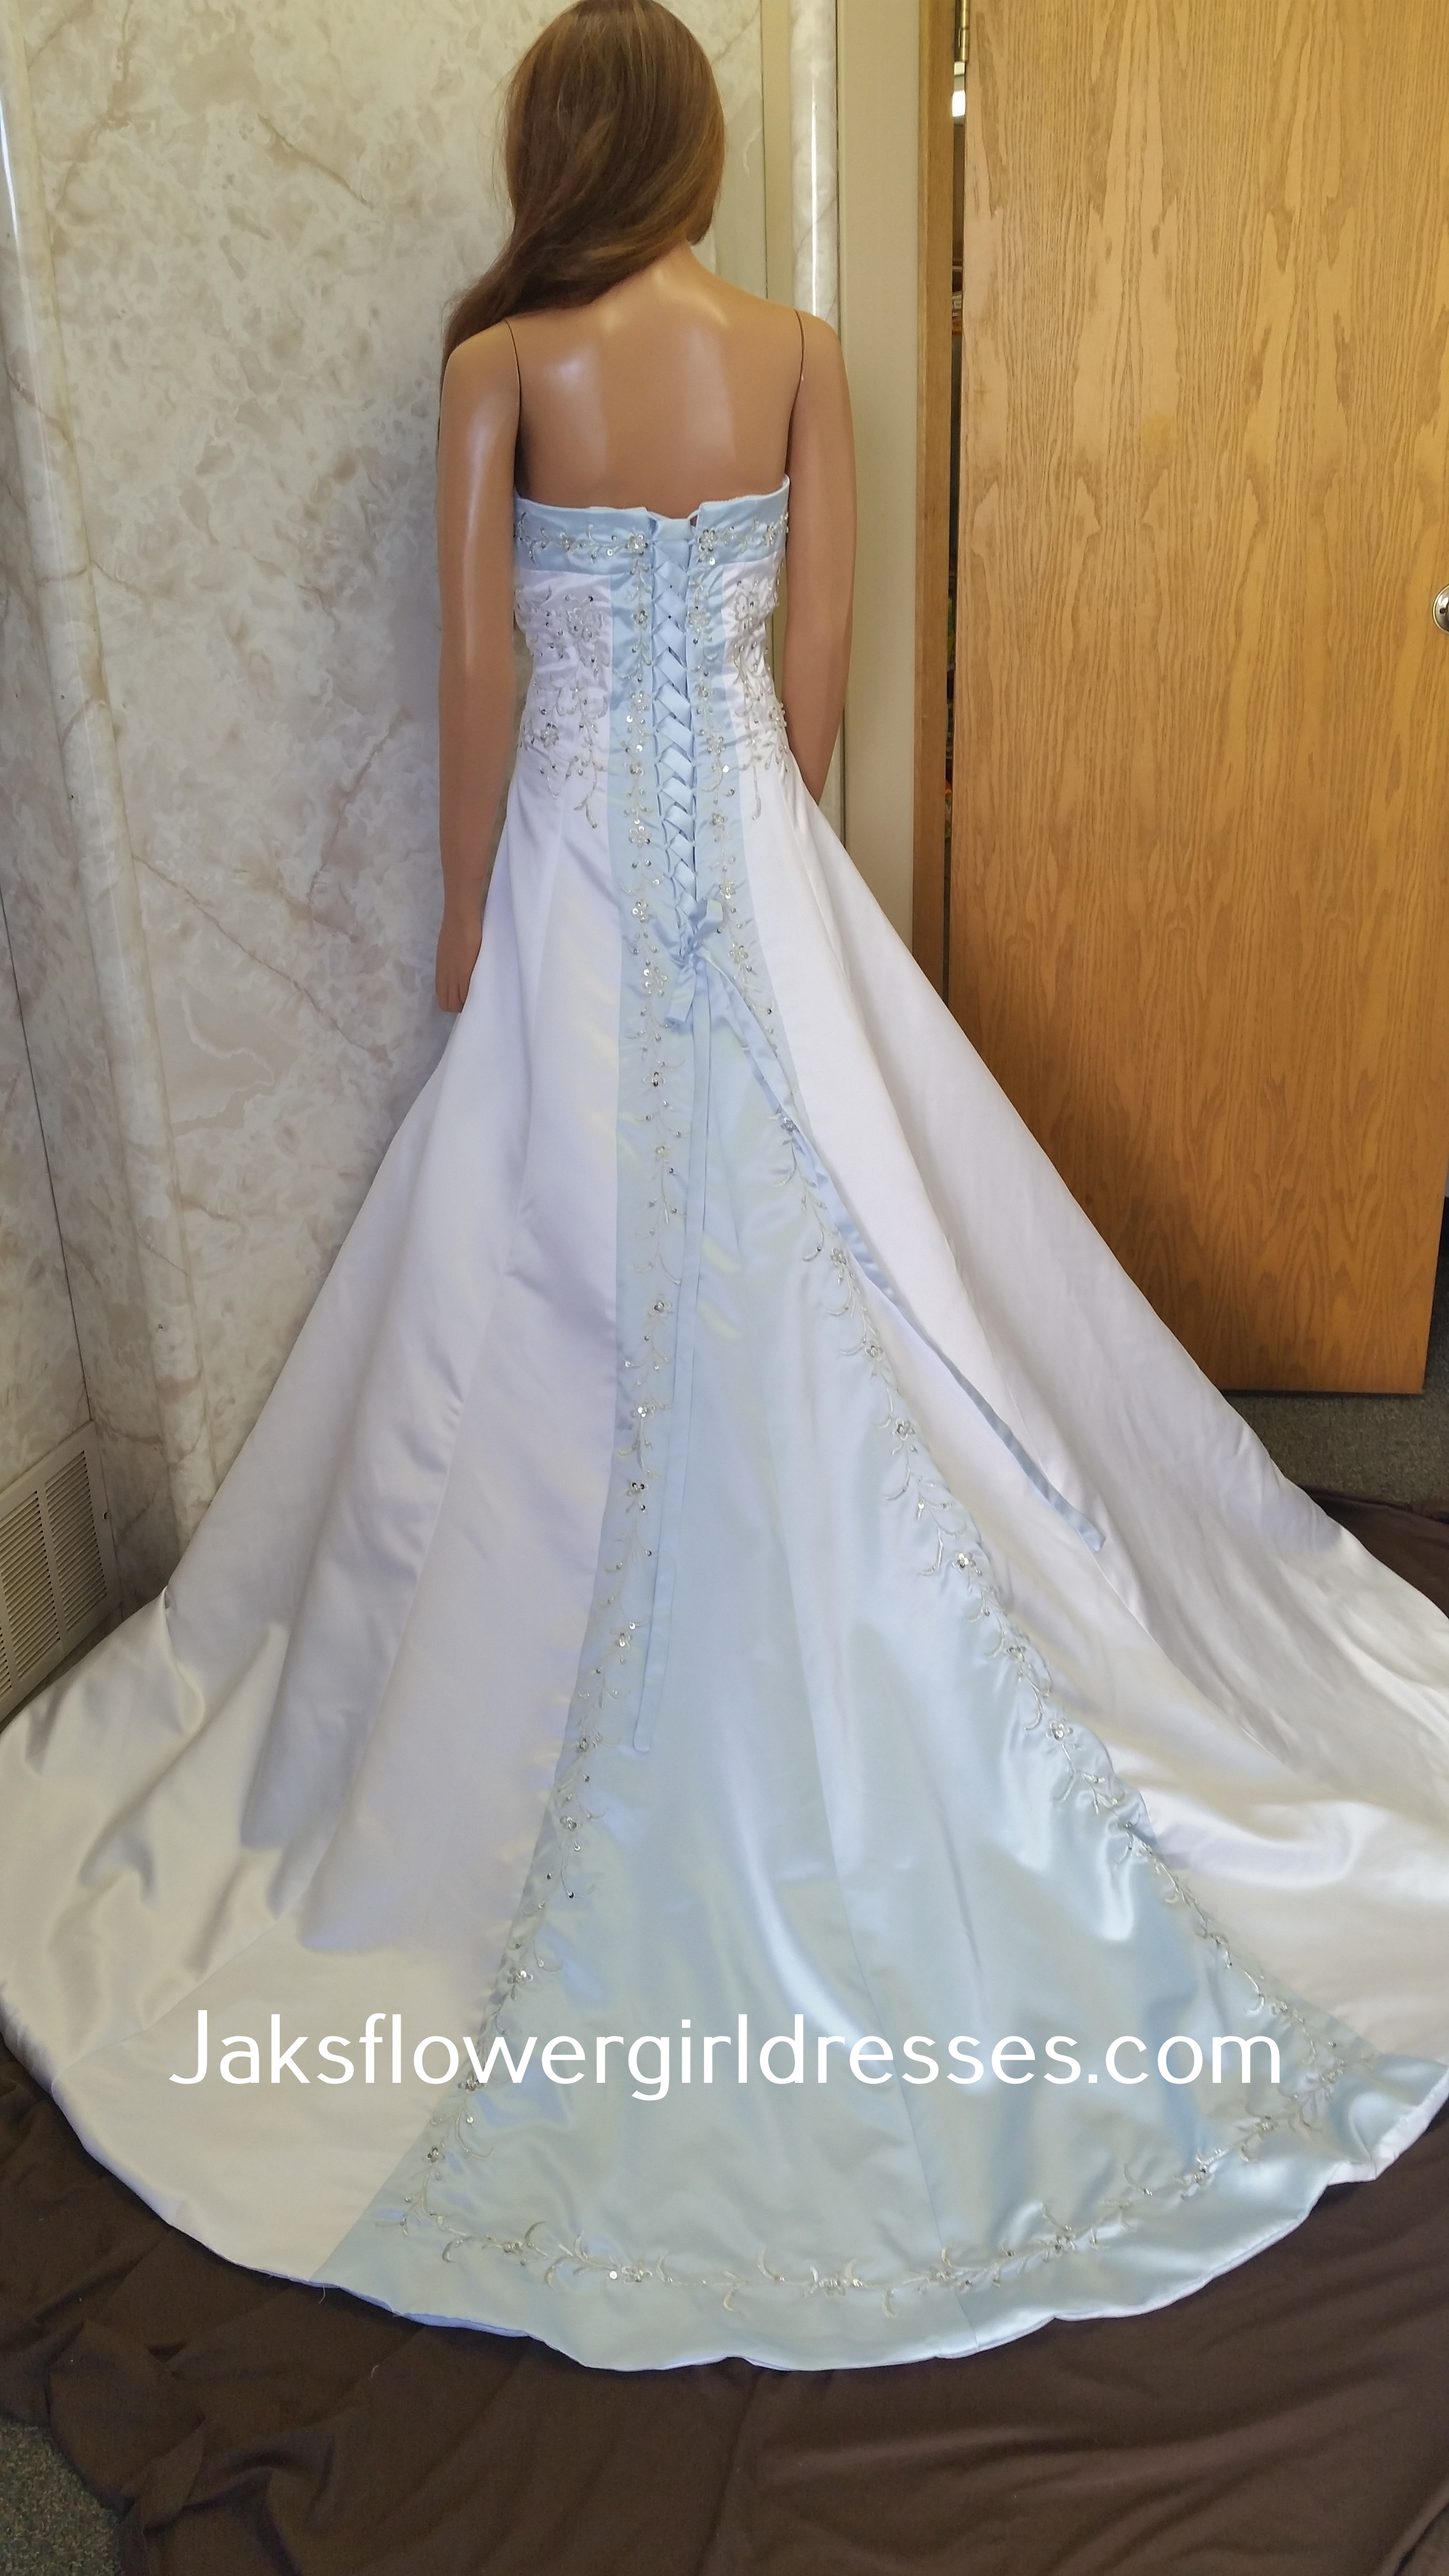 white and light blue wedding gown